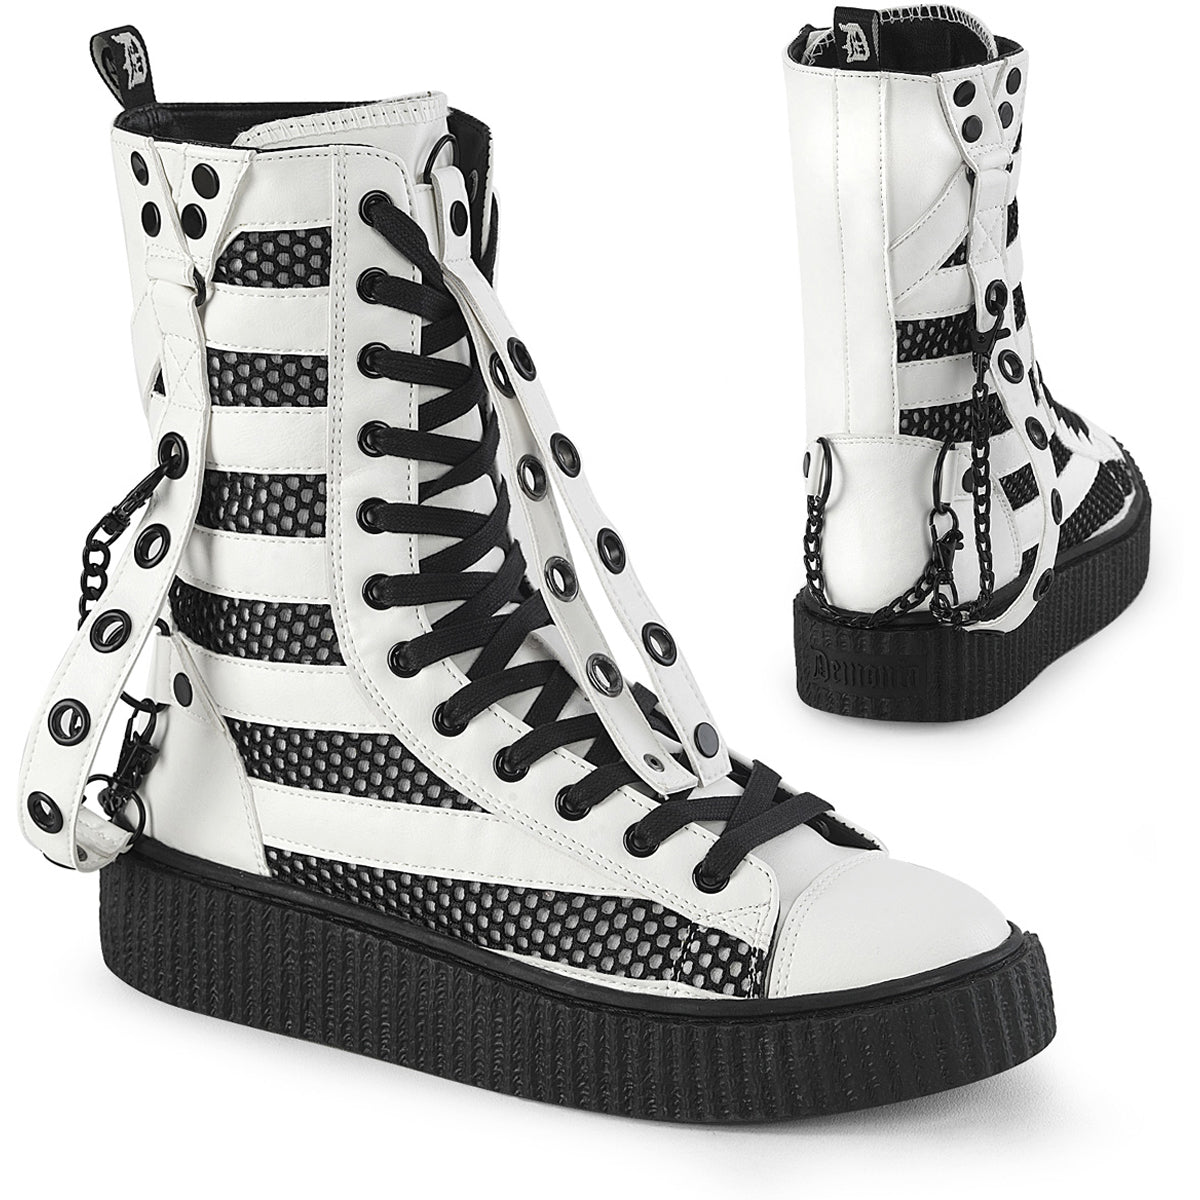 1 1/2"Pf Round Toe Lace Up Front Calf High Creeper Sneaker Pleaser Demonia SNEEKER/325